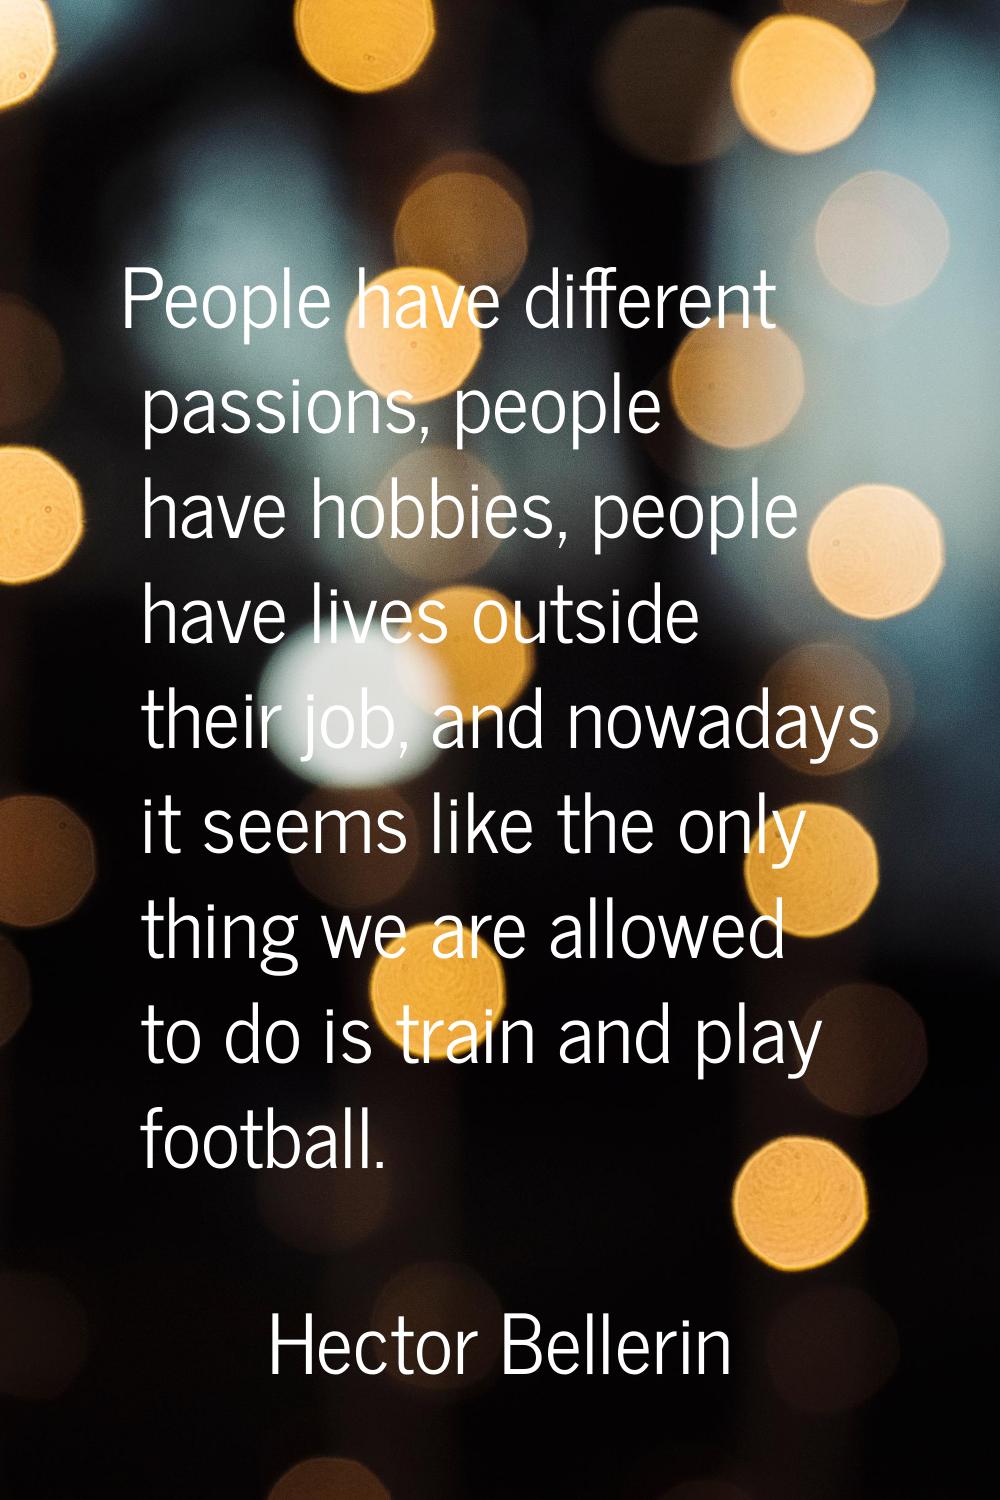 People have different passions, people have hobbies, people have lives outside their job, and nowad